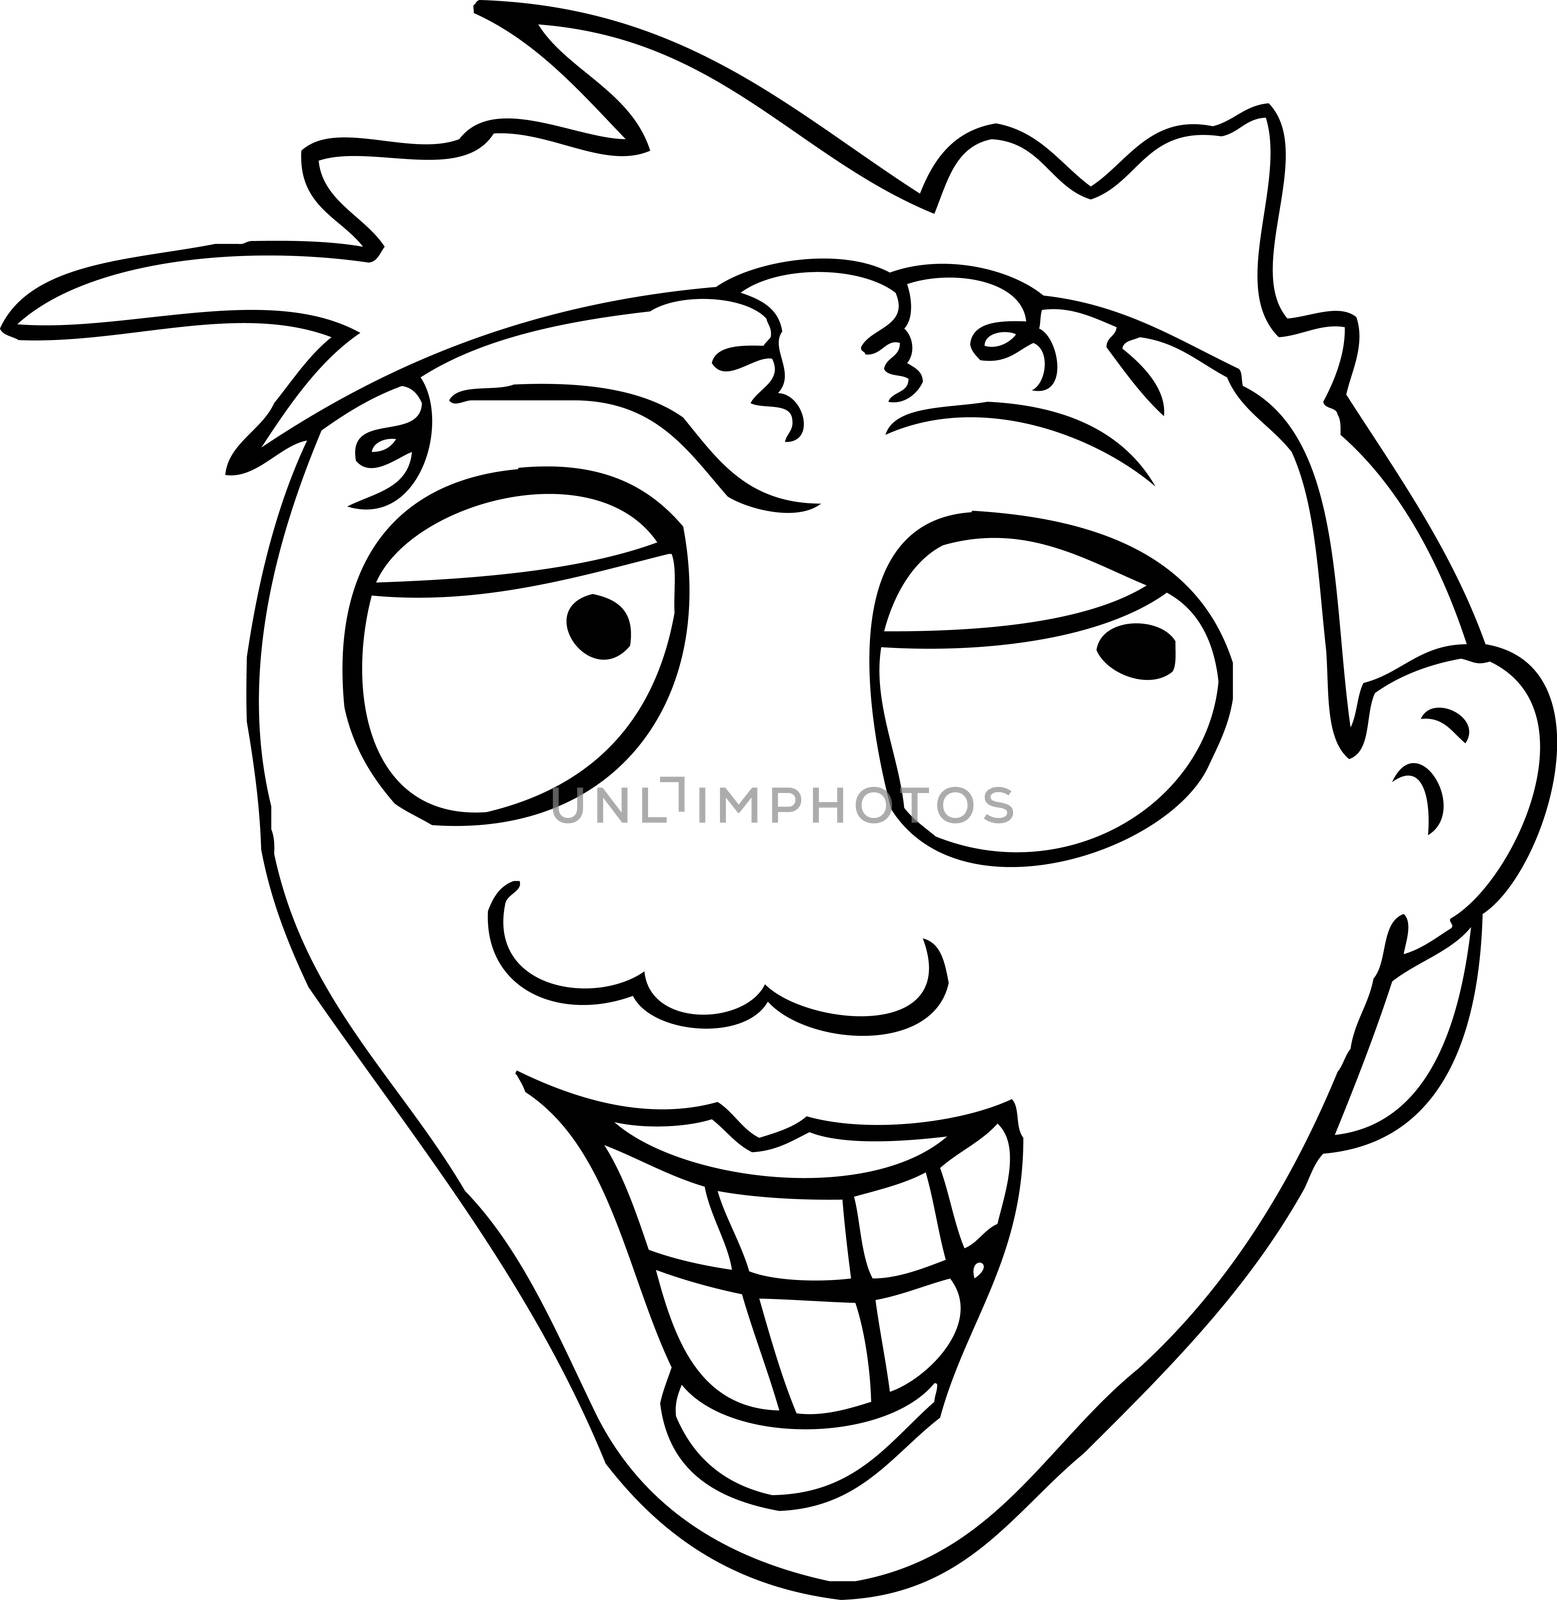 Outlined man with big smile and teeth over white